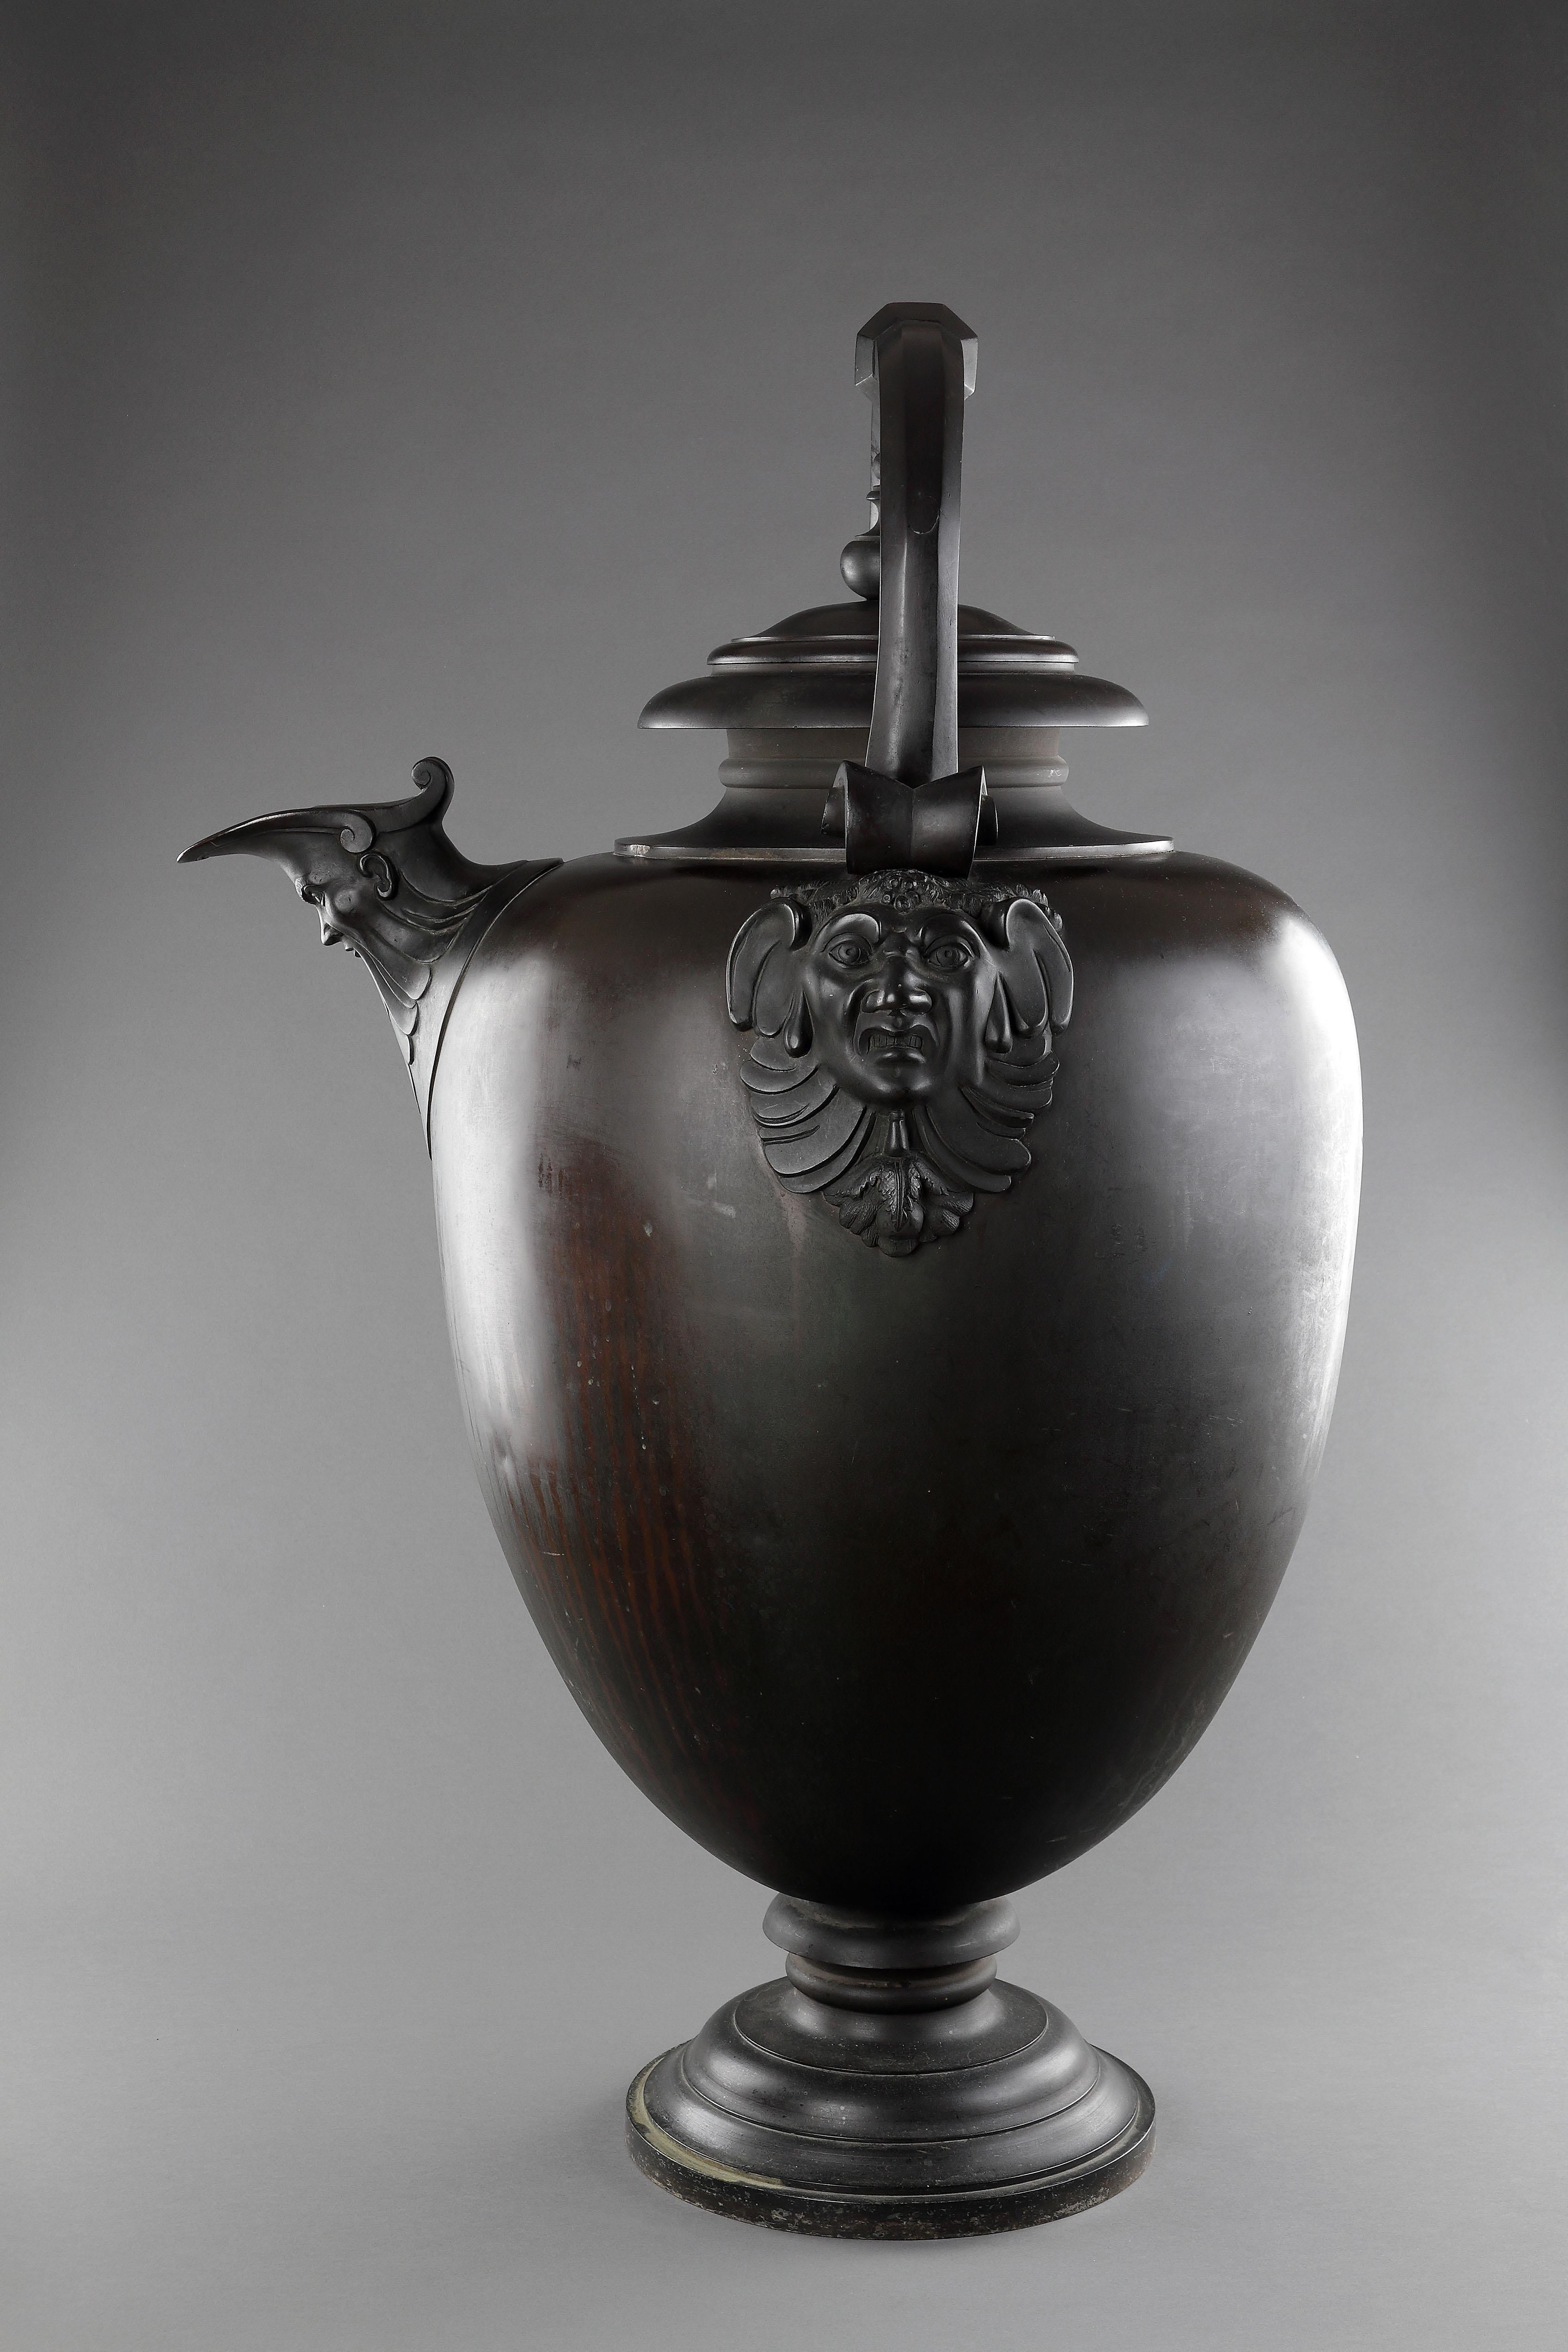 A Very Fine and Monumental Ovoid Vase or Ewer ‘after the antique’ 
Bronze 
The bulbous body with a spout springing from a grotesque mask, the loop handle cast and chased with fruit arising from caryatids, with a moevable circular lid
French or